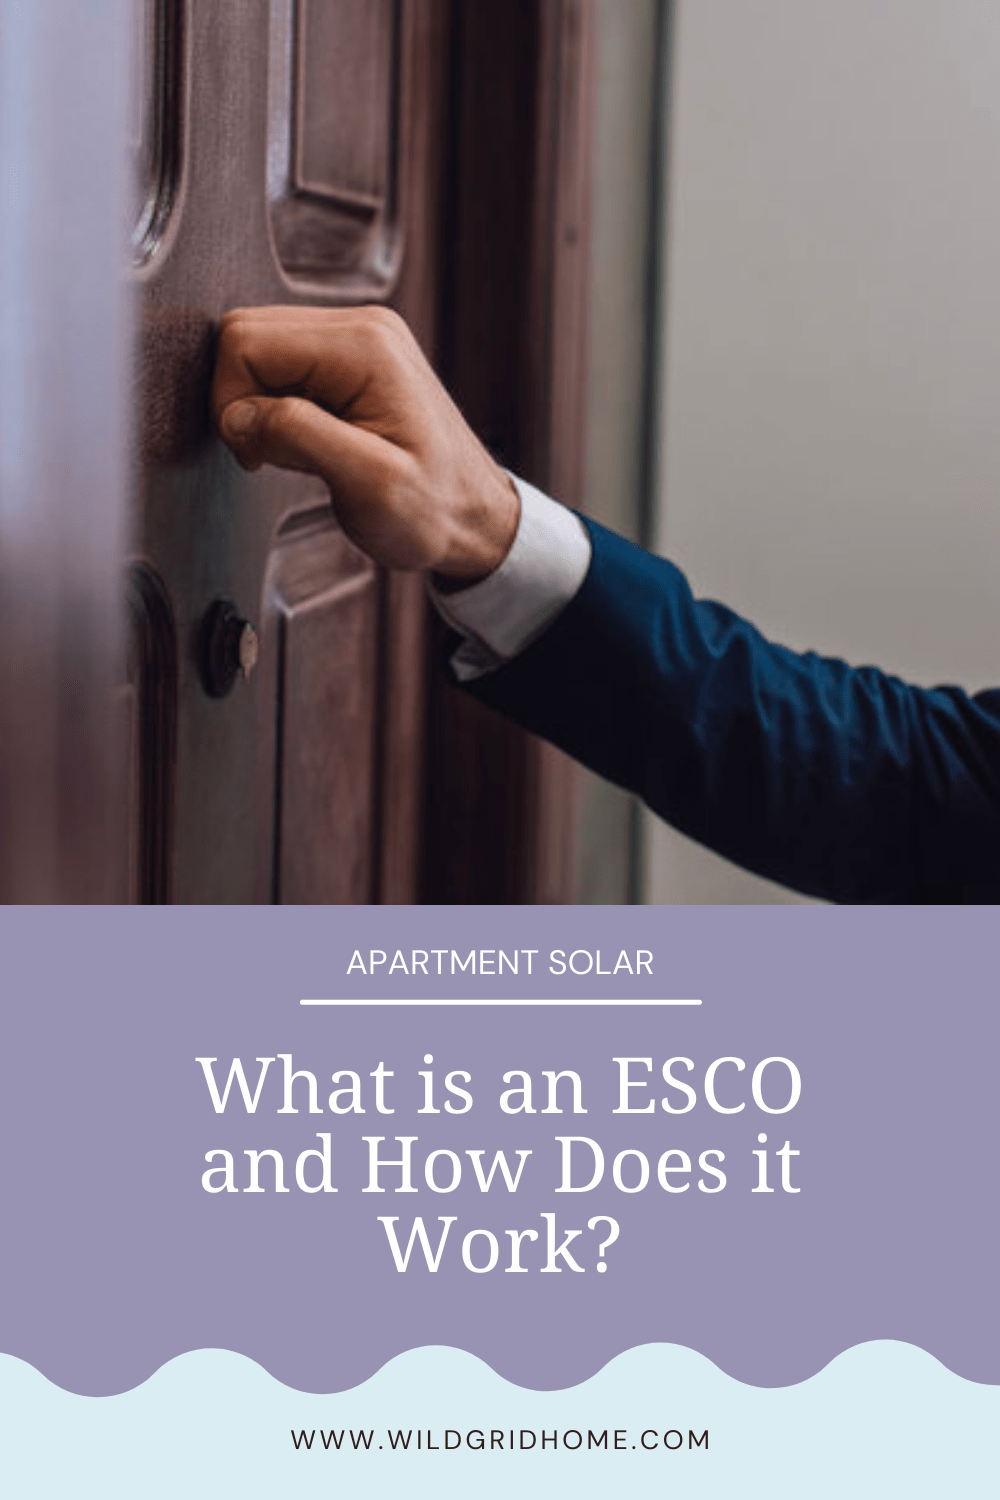 What is an ESCO and how does it work? - Wildgrid Home